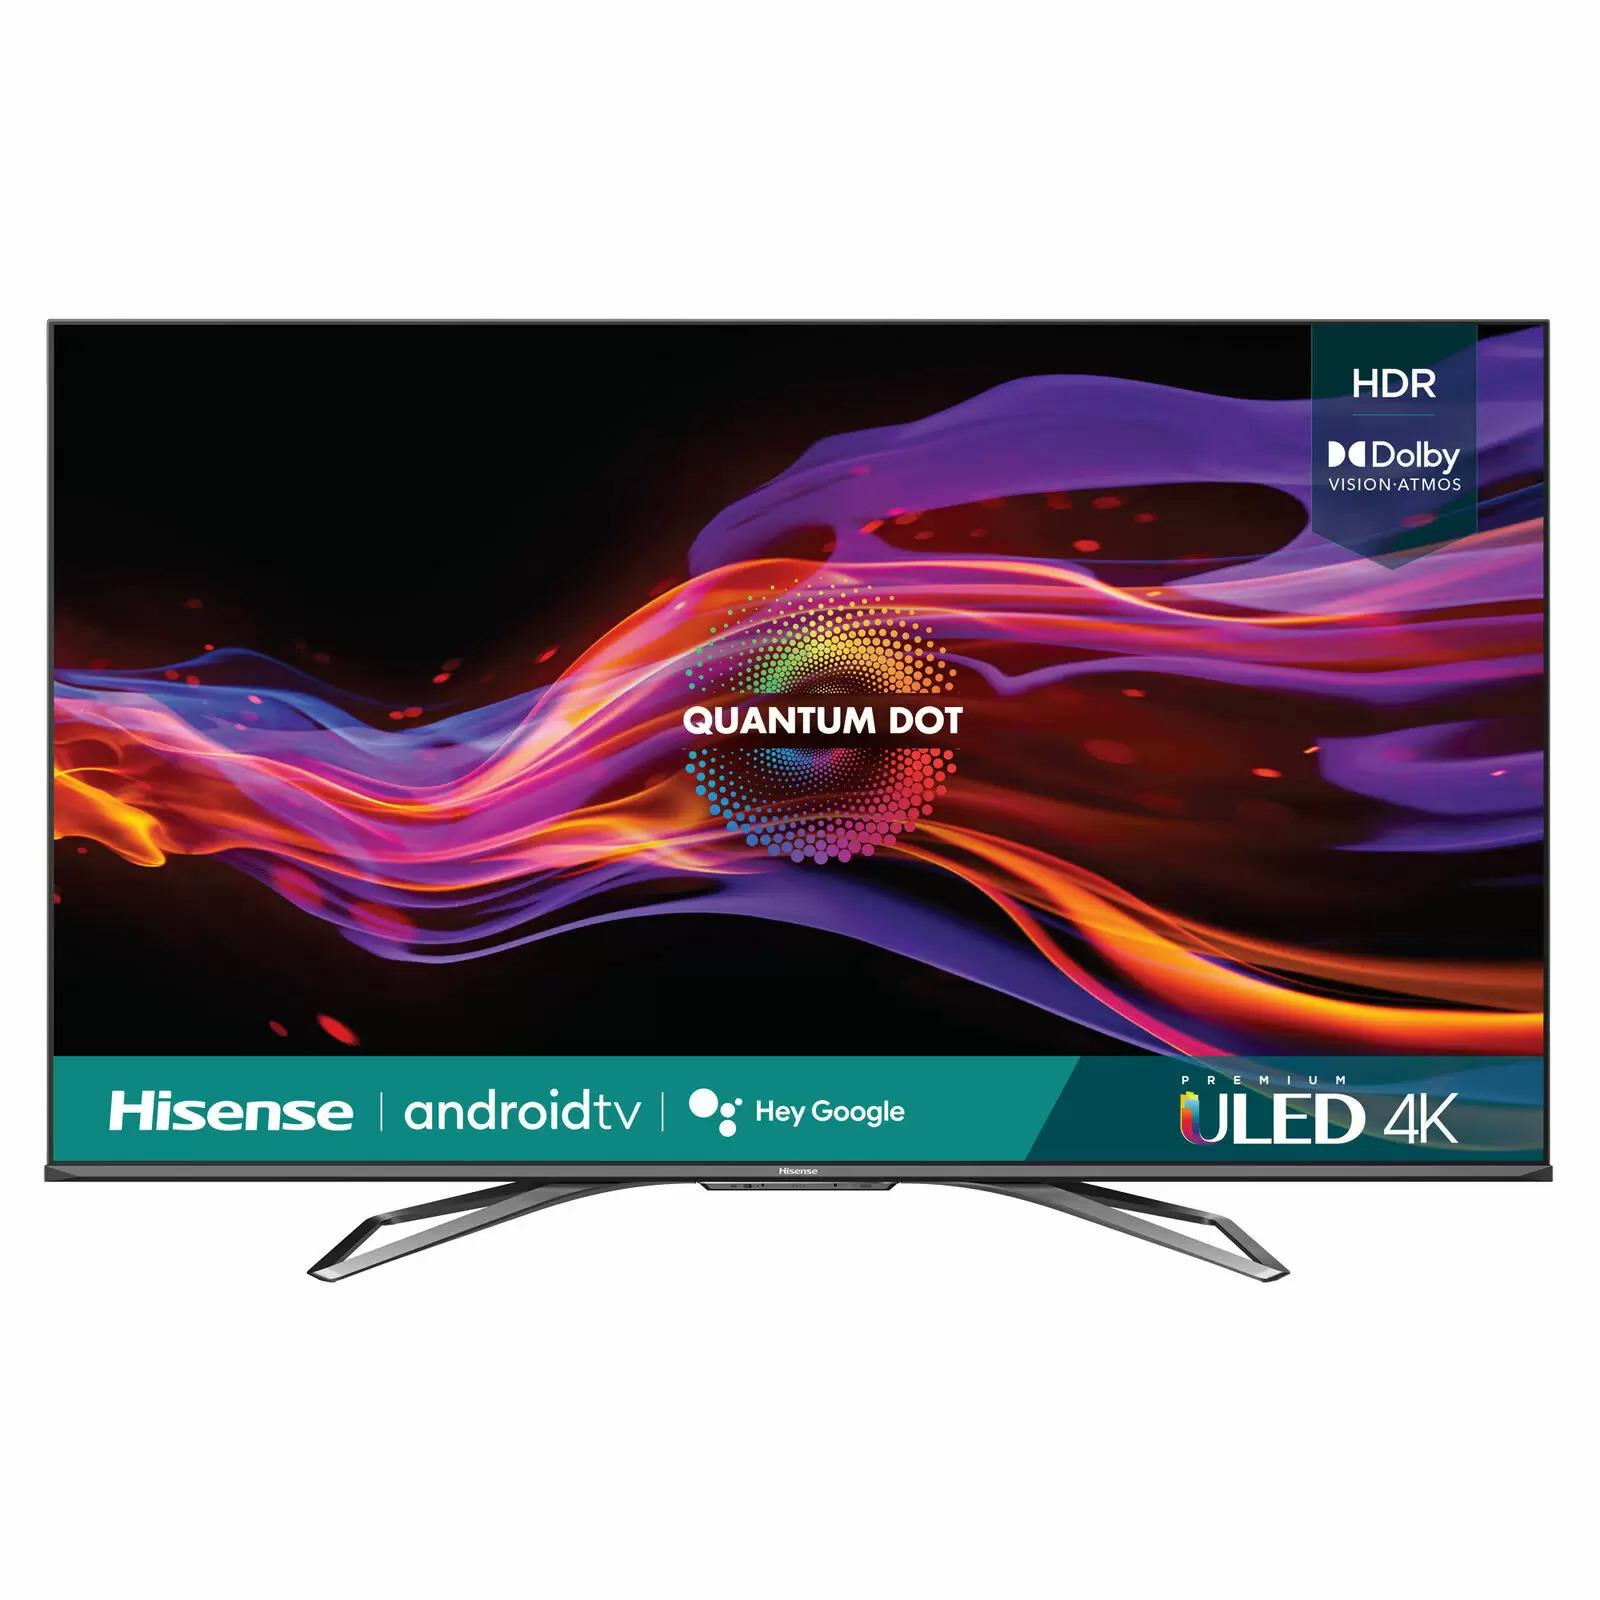 Hisense 65in U8G Series 4K ULED Quantum Android TV for $611.99 Shipped